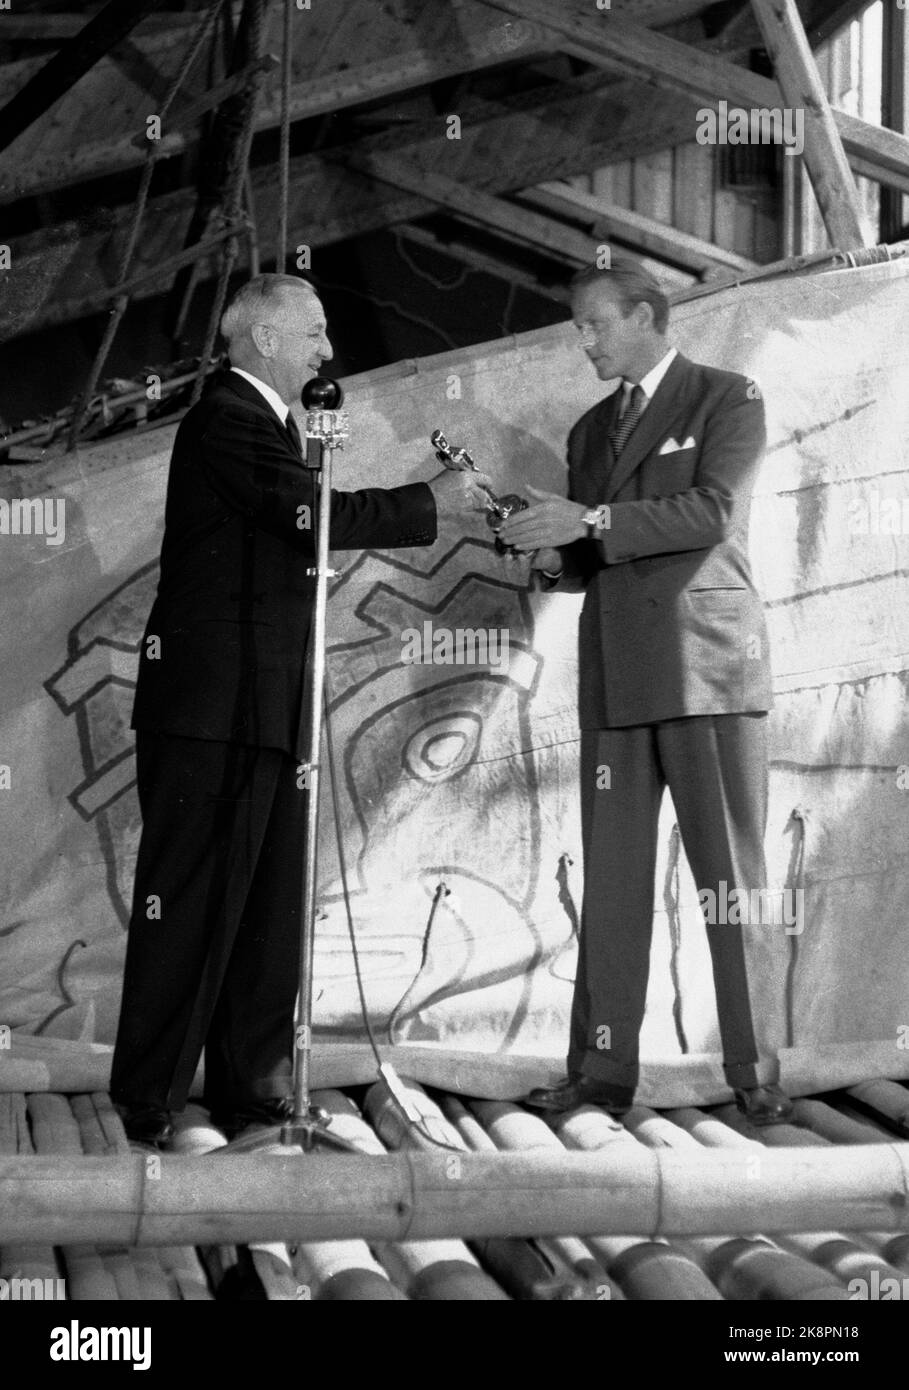 Oslo 19520704 Scientist Thor Heyerdahl (th) receives the film award Oscar for the film about the Kon Tiki expedition. The film received Oscar for best documentary in 1951. The award is presented by Sol Lesset. The awards ceremony took place in the Kon Tiki Museet. Photo: NTB Stock Photo